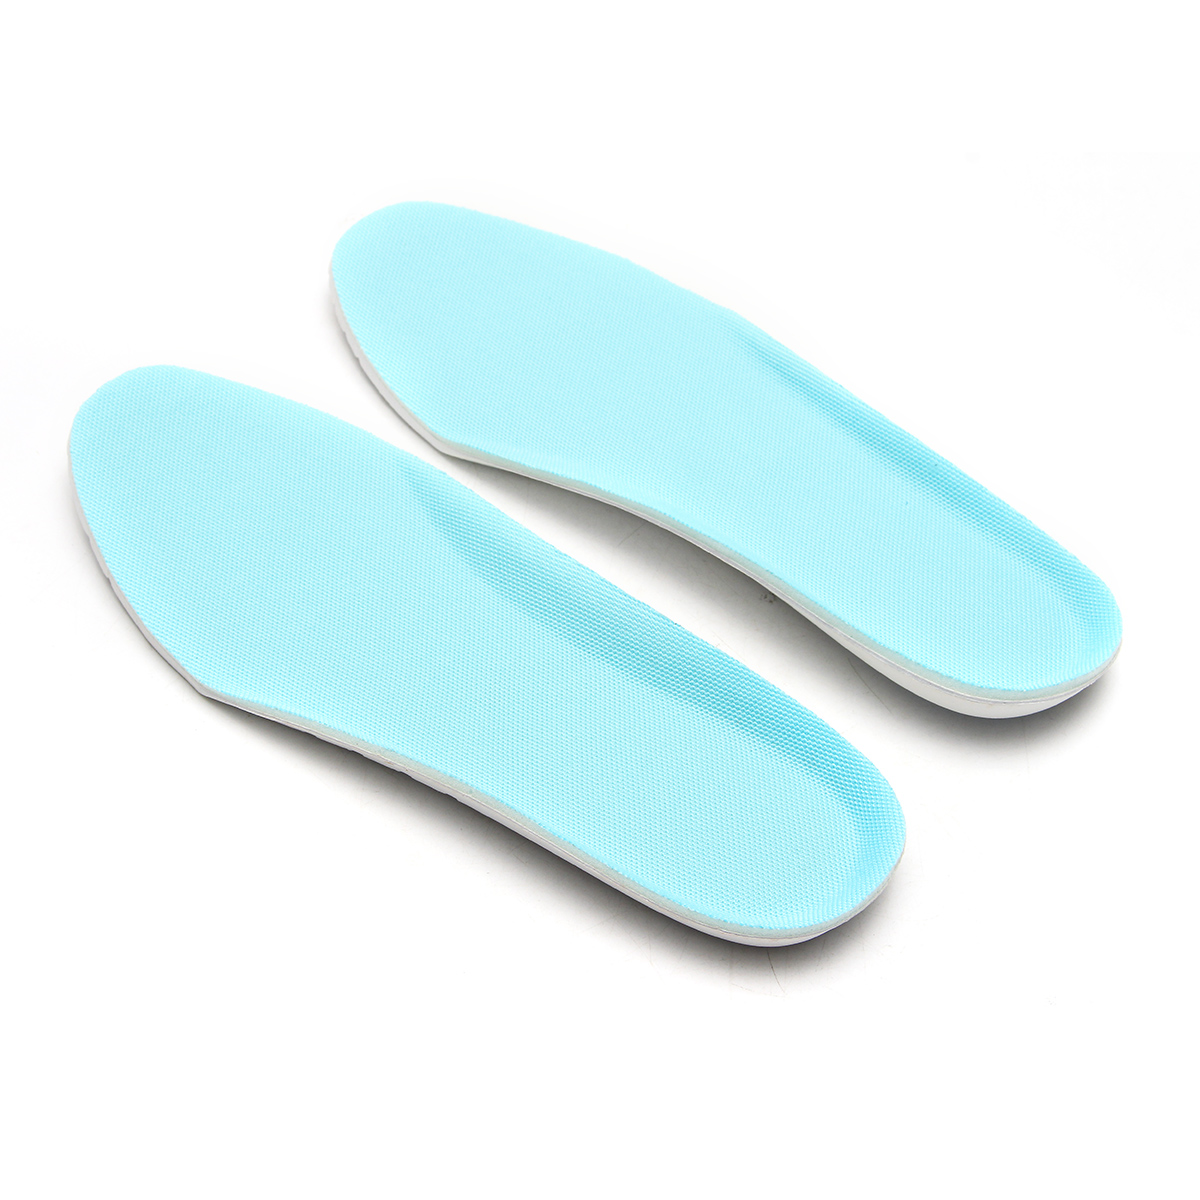 1-Pair-Damping-Orthotic-Sports-Insoles-Shoe-Pad-Heel-Cushion-For-Arch-Support-1117171